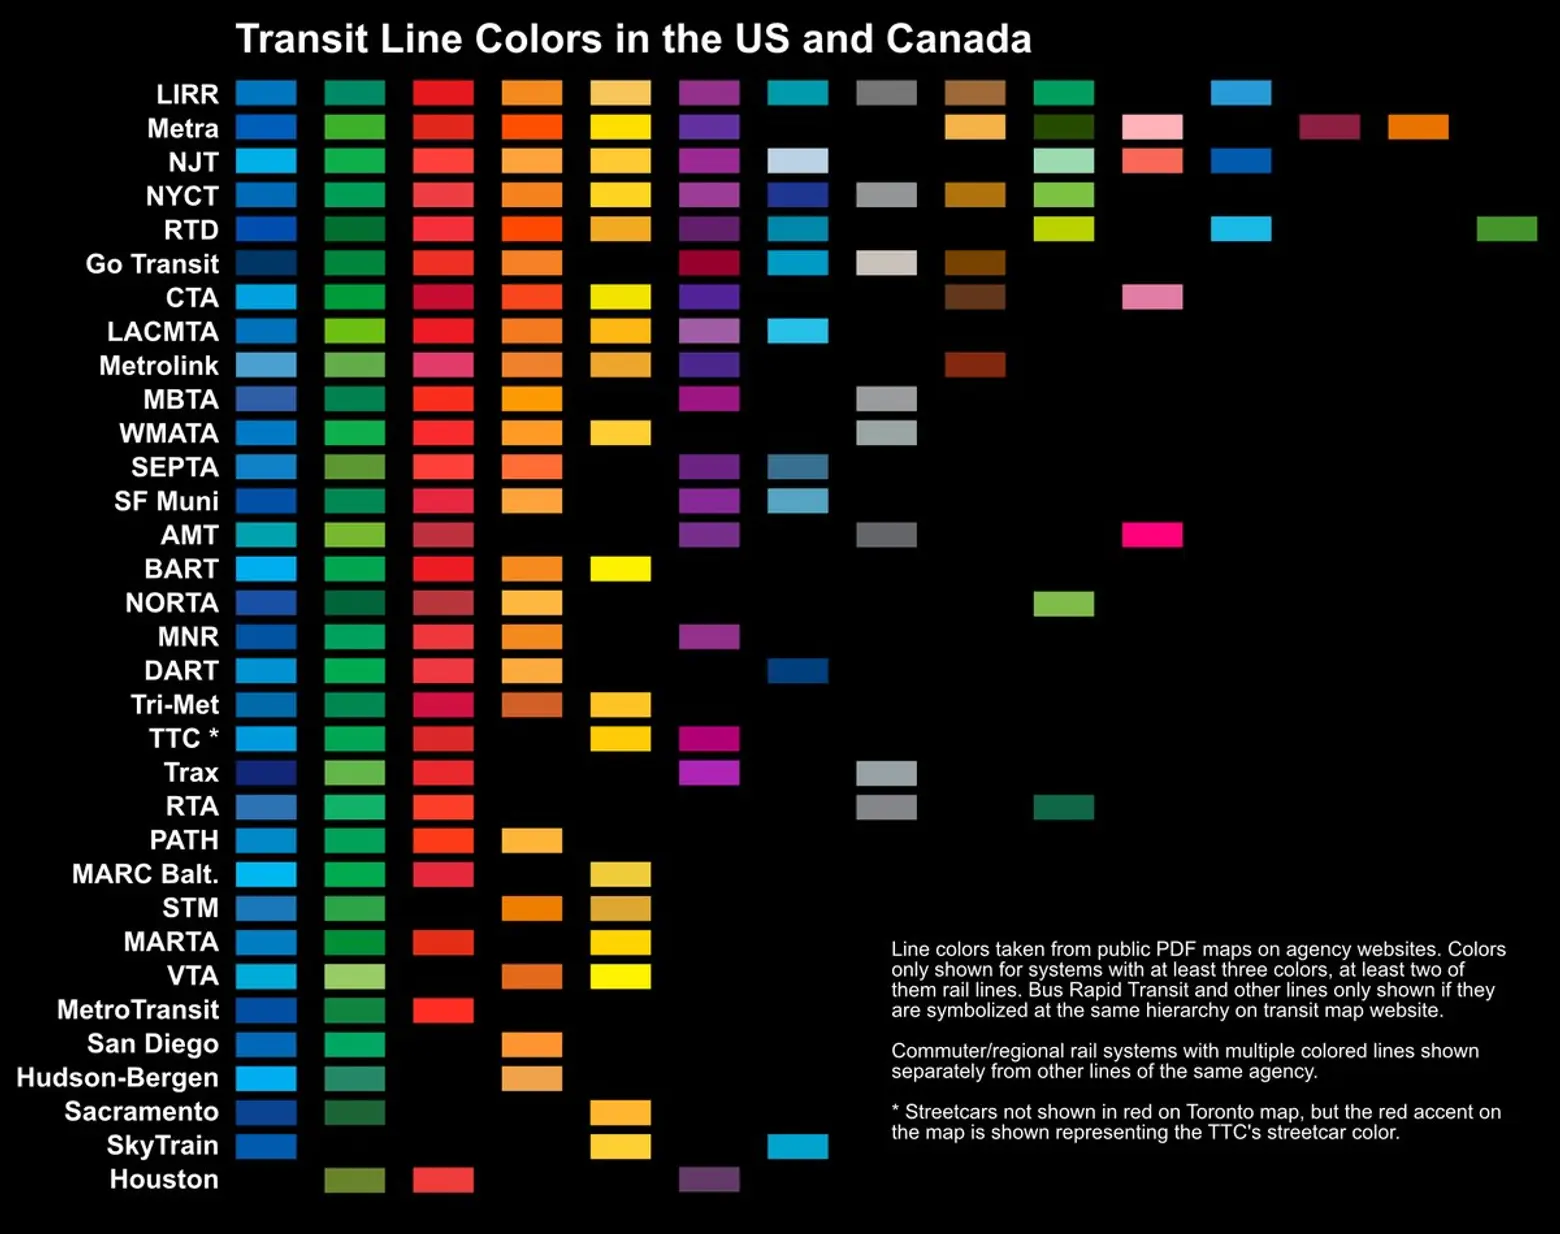 This graphic color codes major transit lines in North America